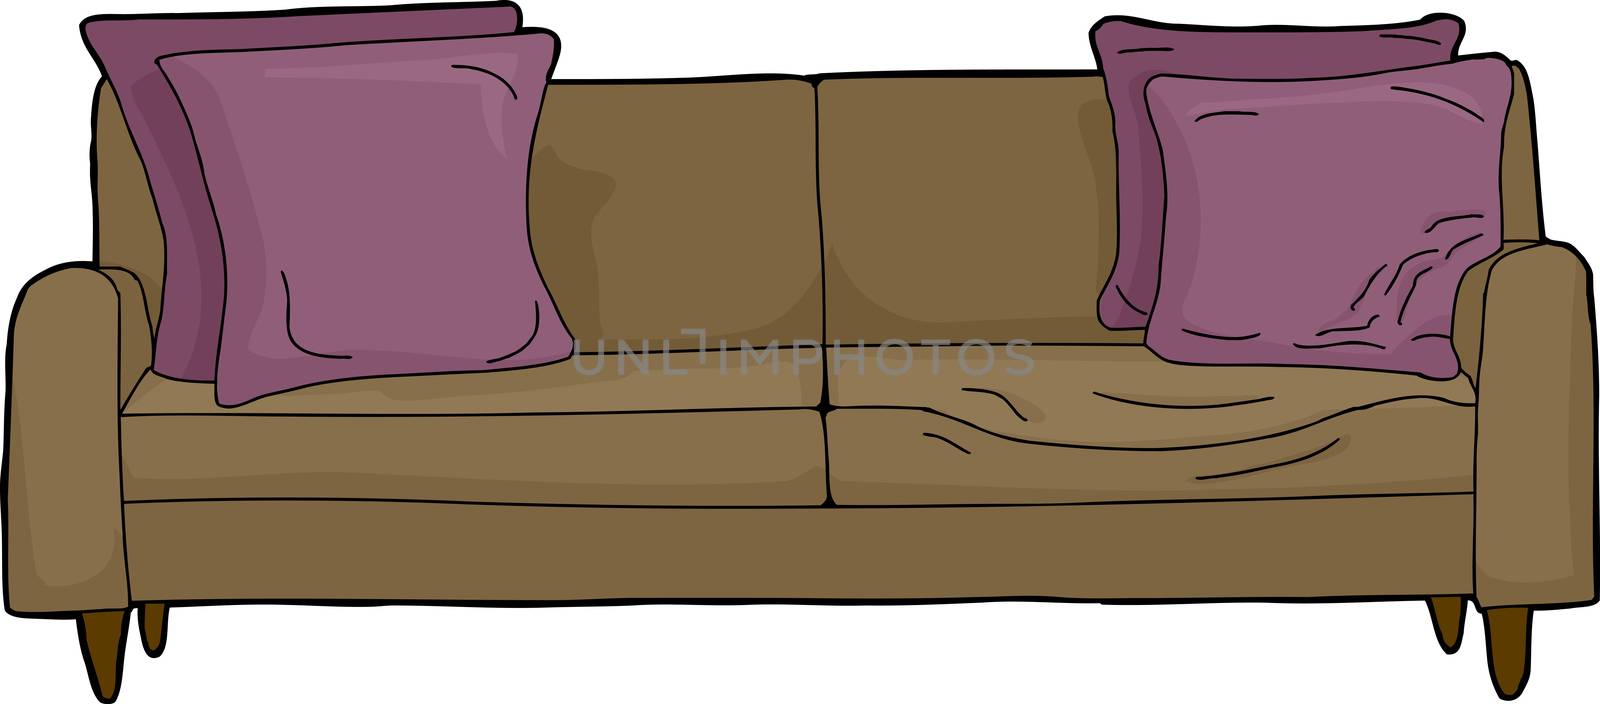 Invisible person seated in brown couch with cushions